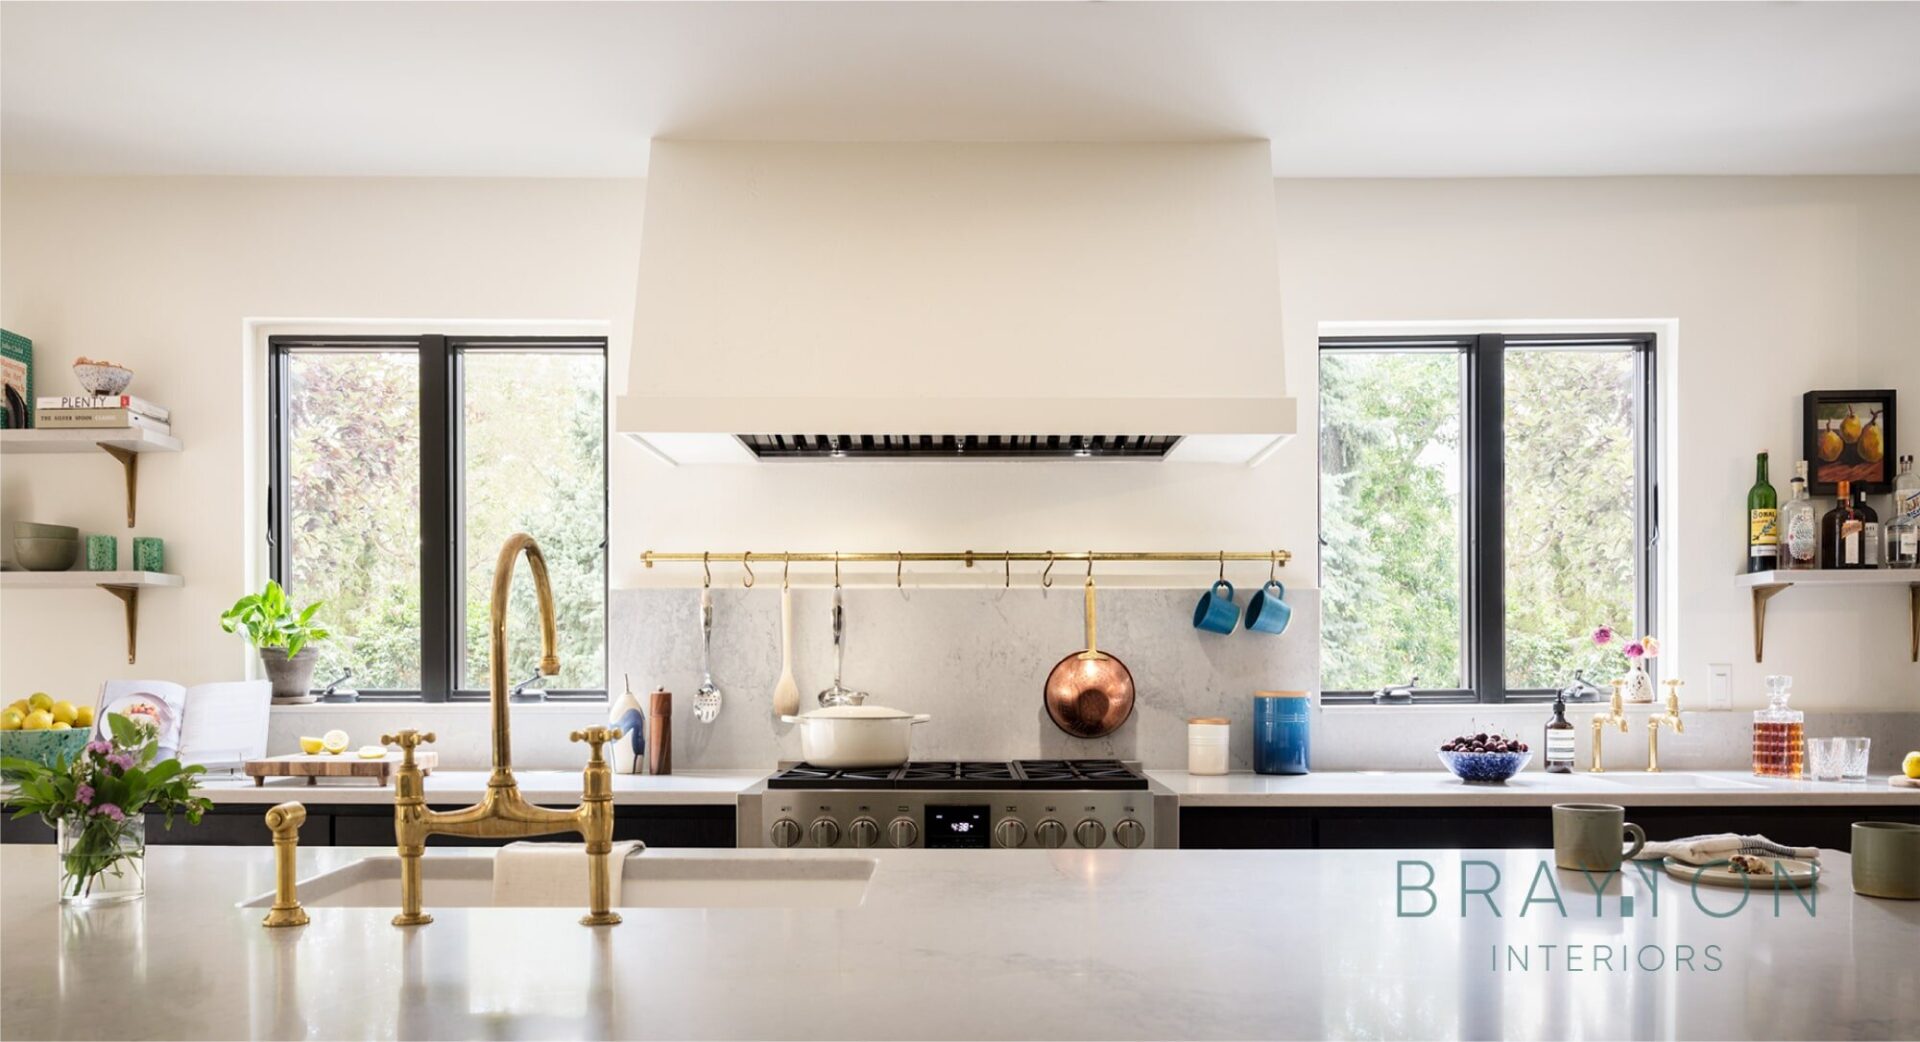 A custom drywall range hood anchors the feature wall of the kitchen. Antique brass faucets and utensil rail are the perfect accent pieces that won't go out of style.